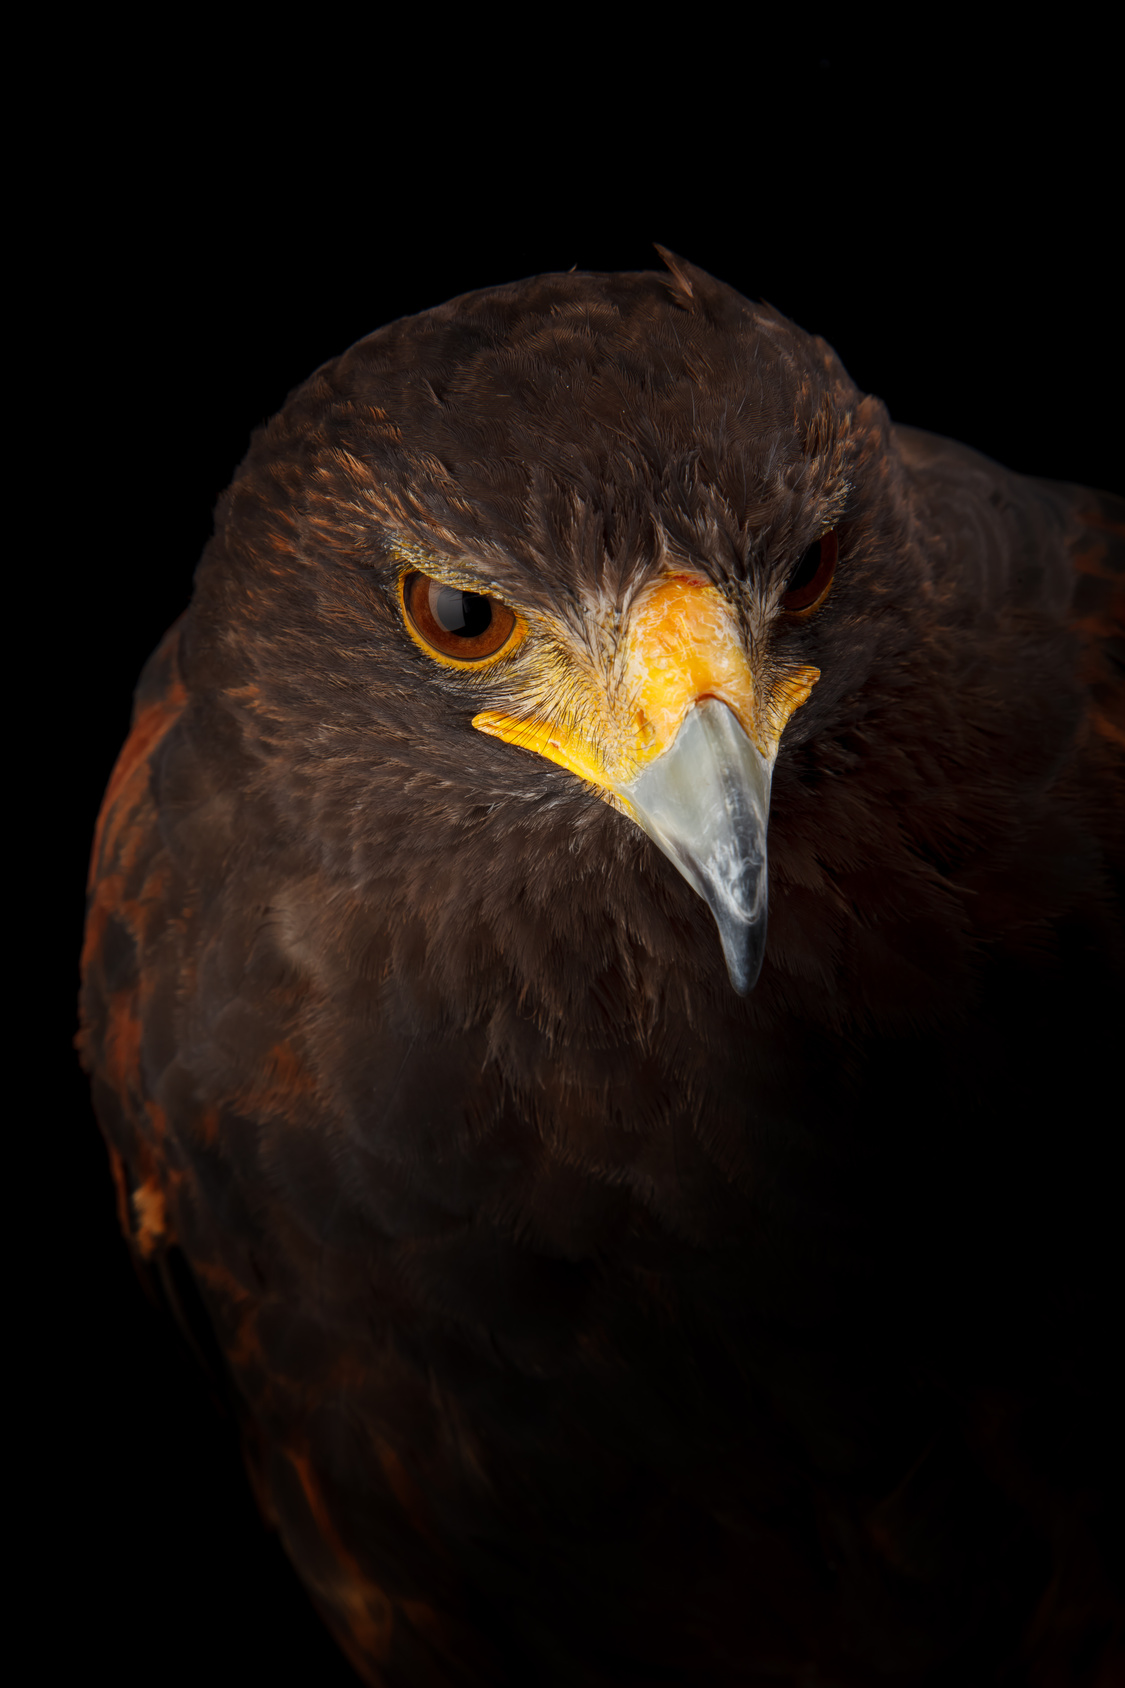 http://www.townandcountryfalconry.co.uk/wp-content/uploads/2016/12/Fotolia_99374140_Subscription_Monthly_M.jpg